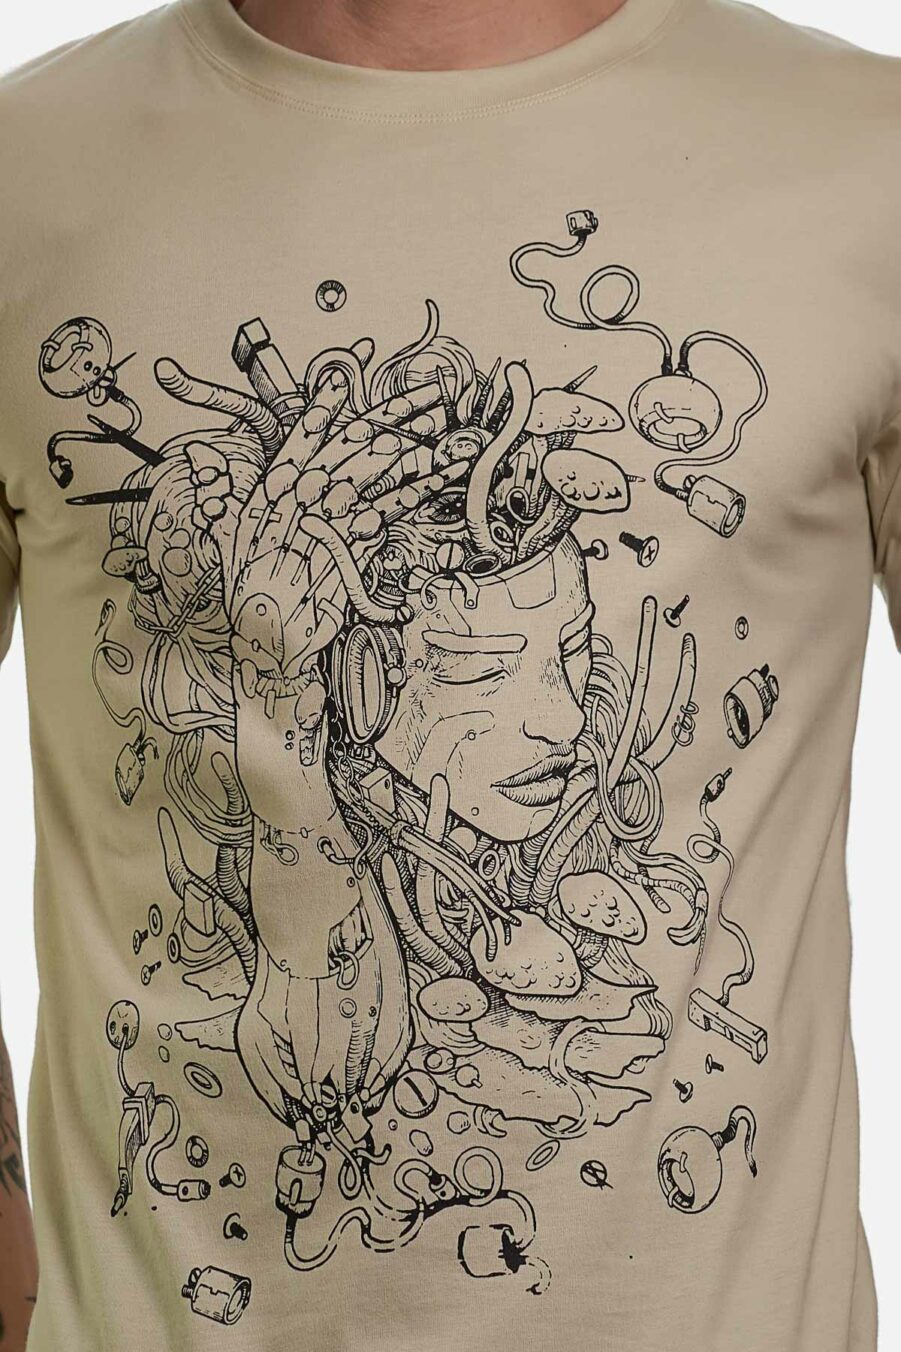 Bioborg t-shirt in sand color, featuring handmade silk screen print, part of Avanyah's alternative streetwear collection for men